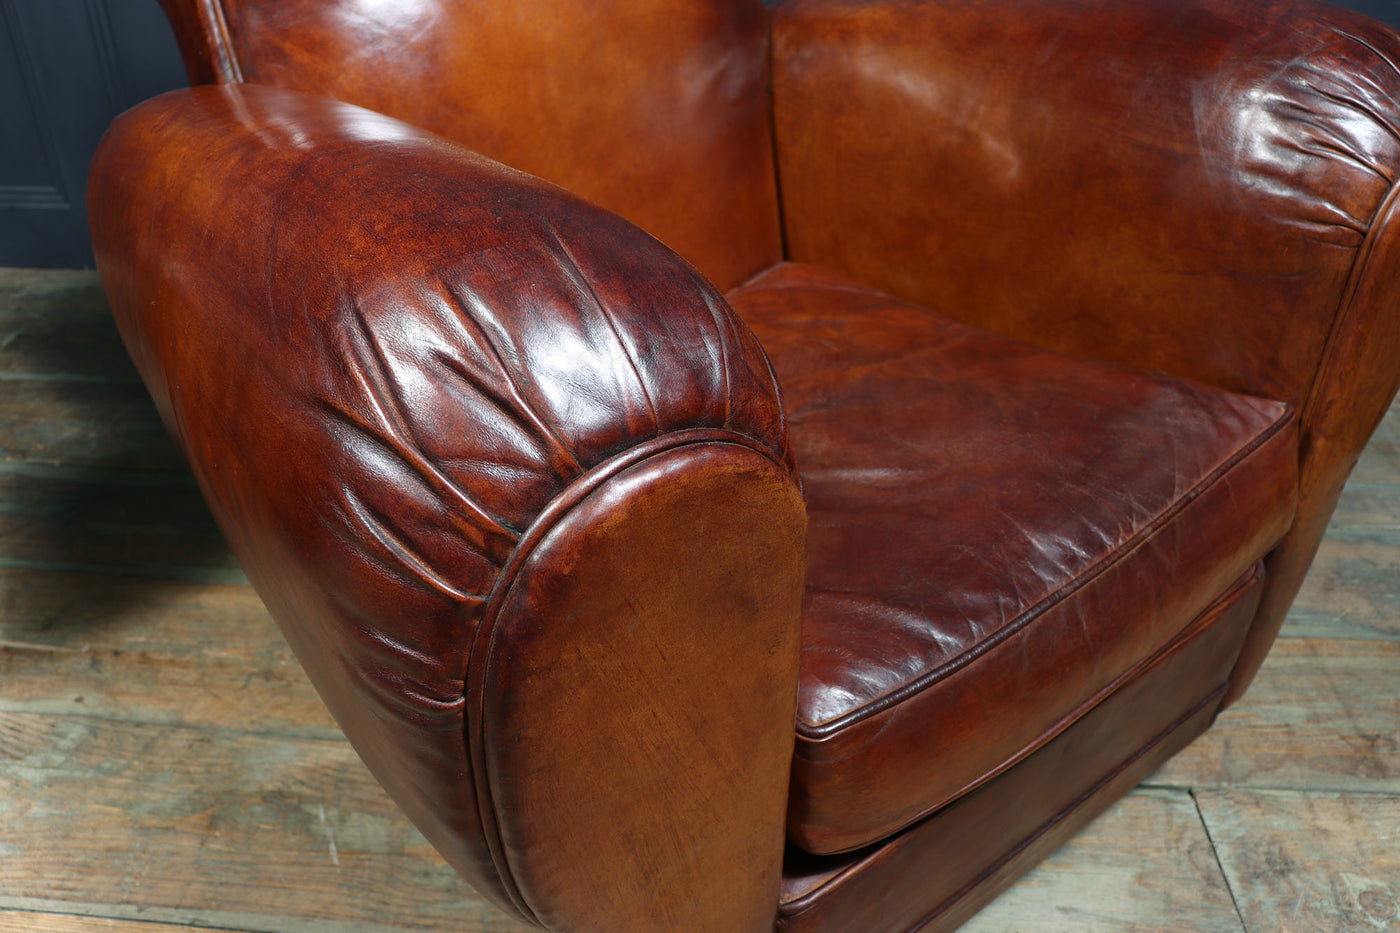 Pair of French Leather Club chairs